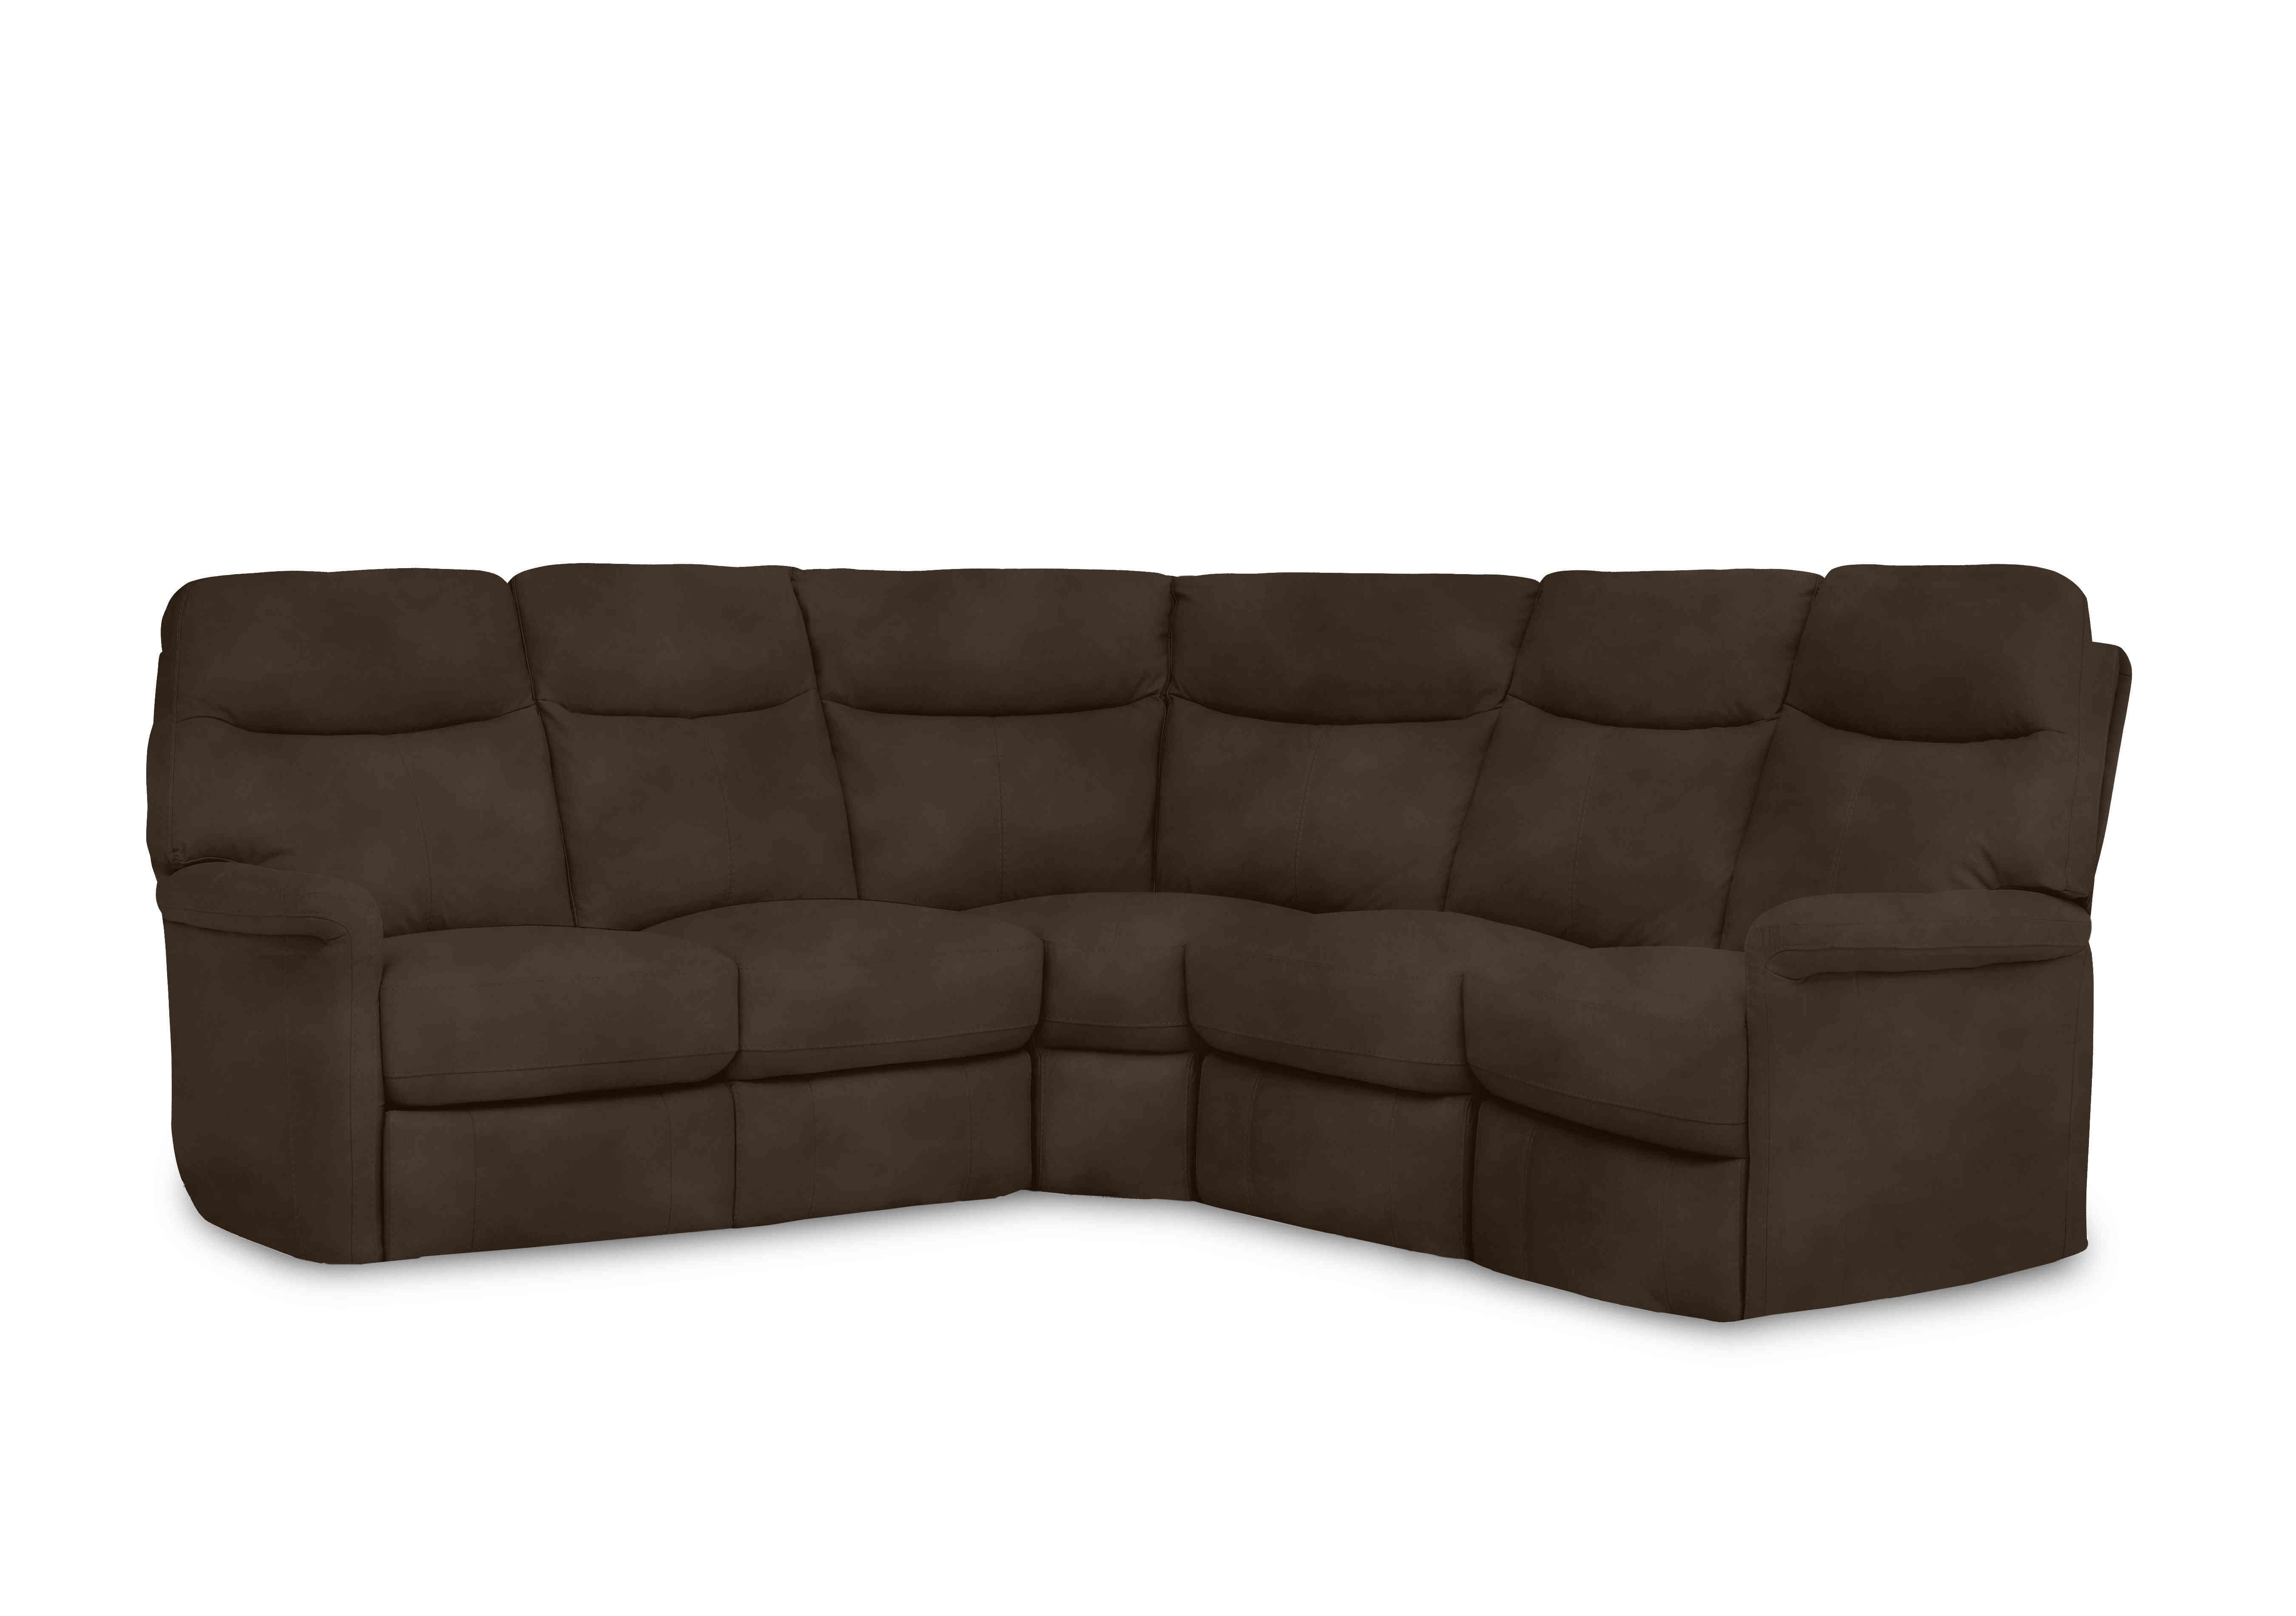 Compact Collection Lille Large Fabric Corner Sofa in Sfa-Pey-R04 Dark Chocolate on Furniture Village